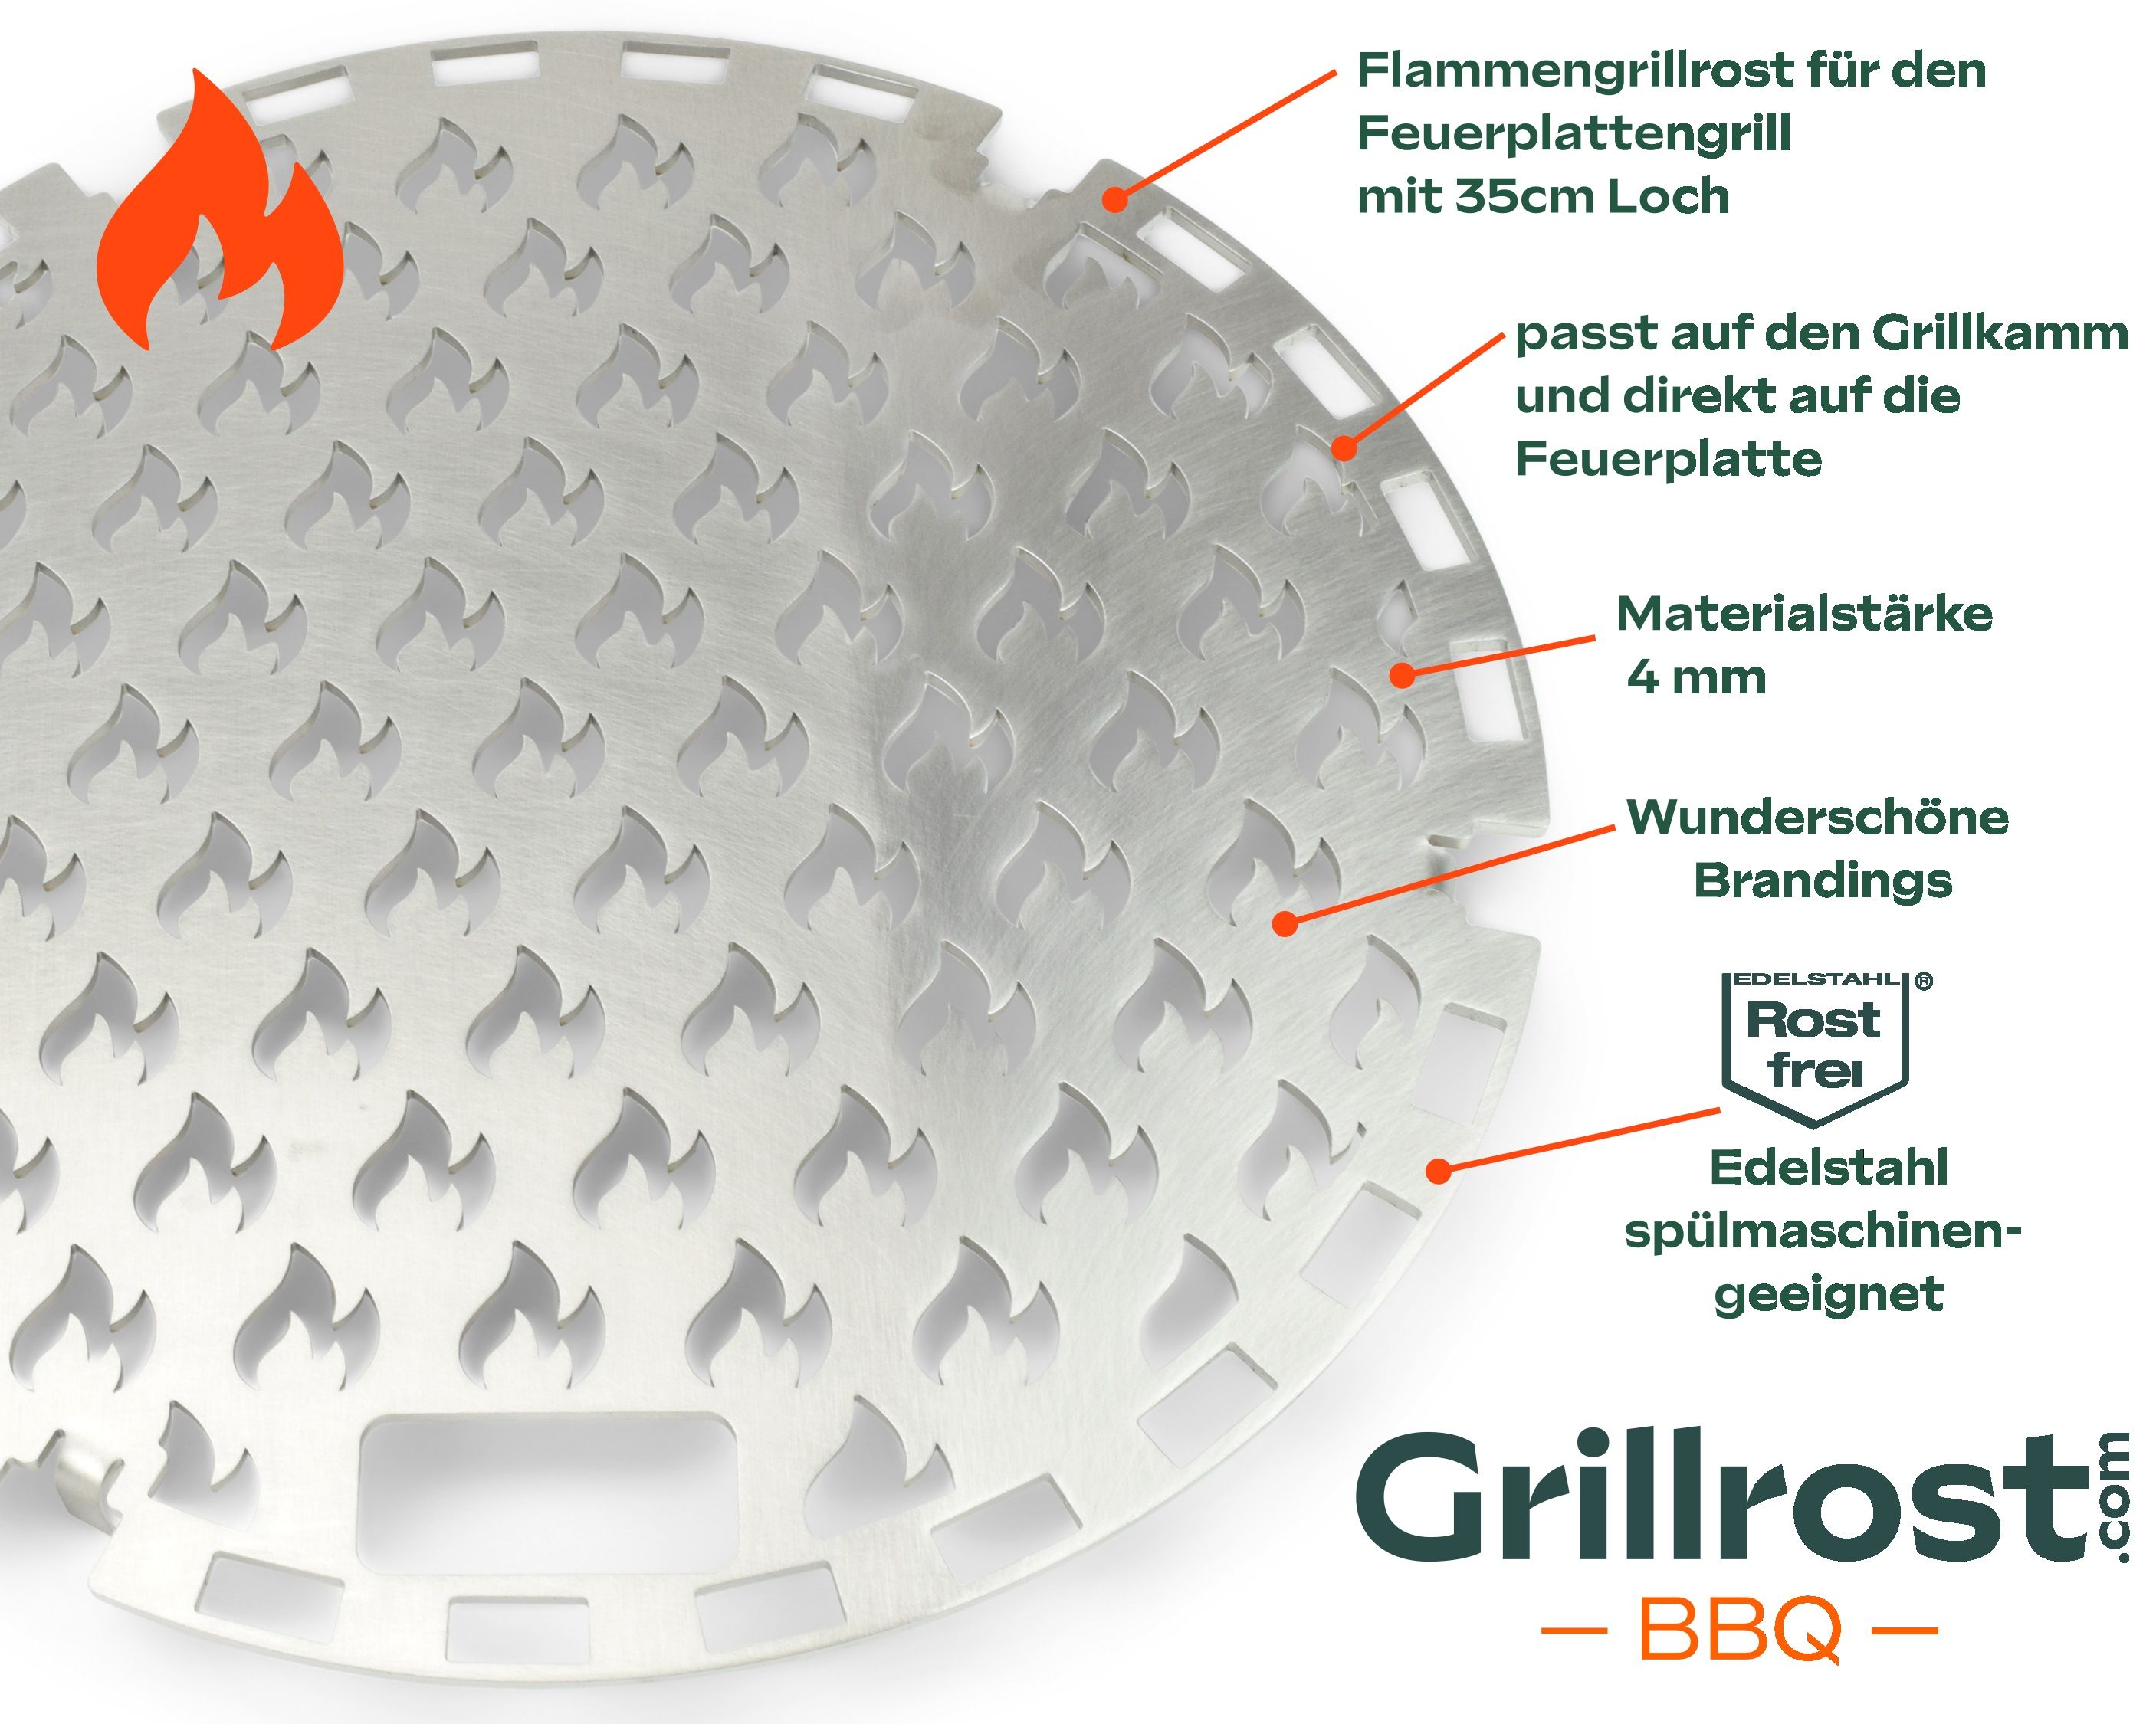 The fire plate grill Flame grill grate Direct flame branding